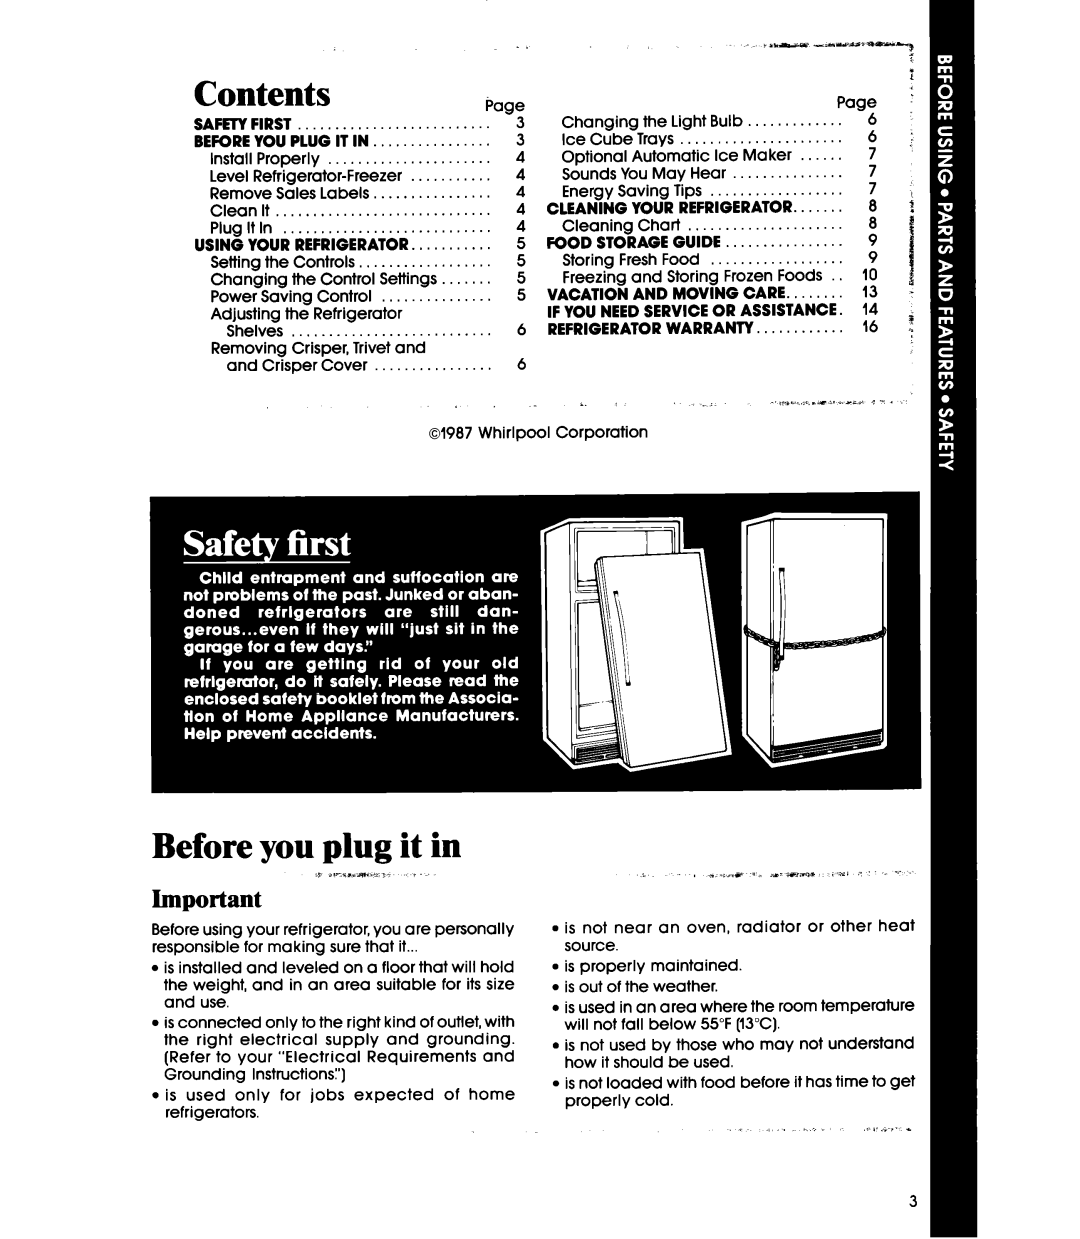 Whirlpool ETl8SK manual Contents, Before you plug it in 